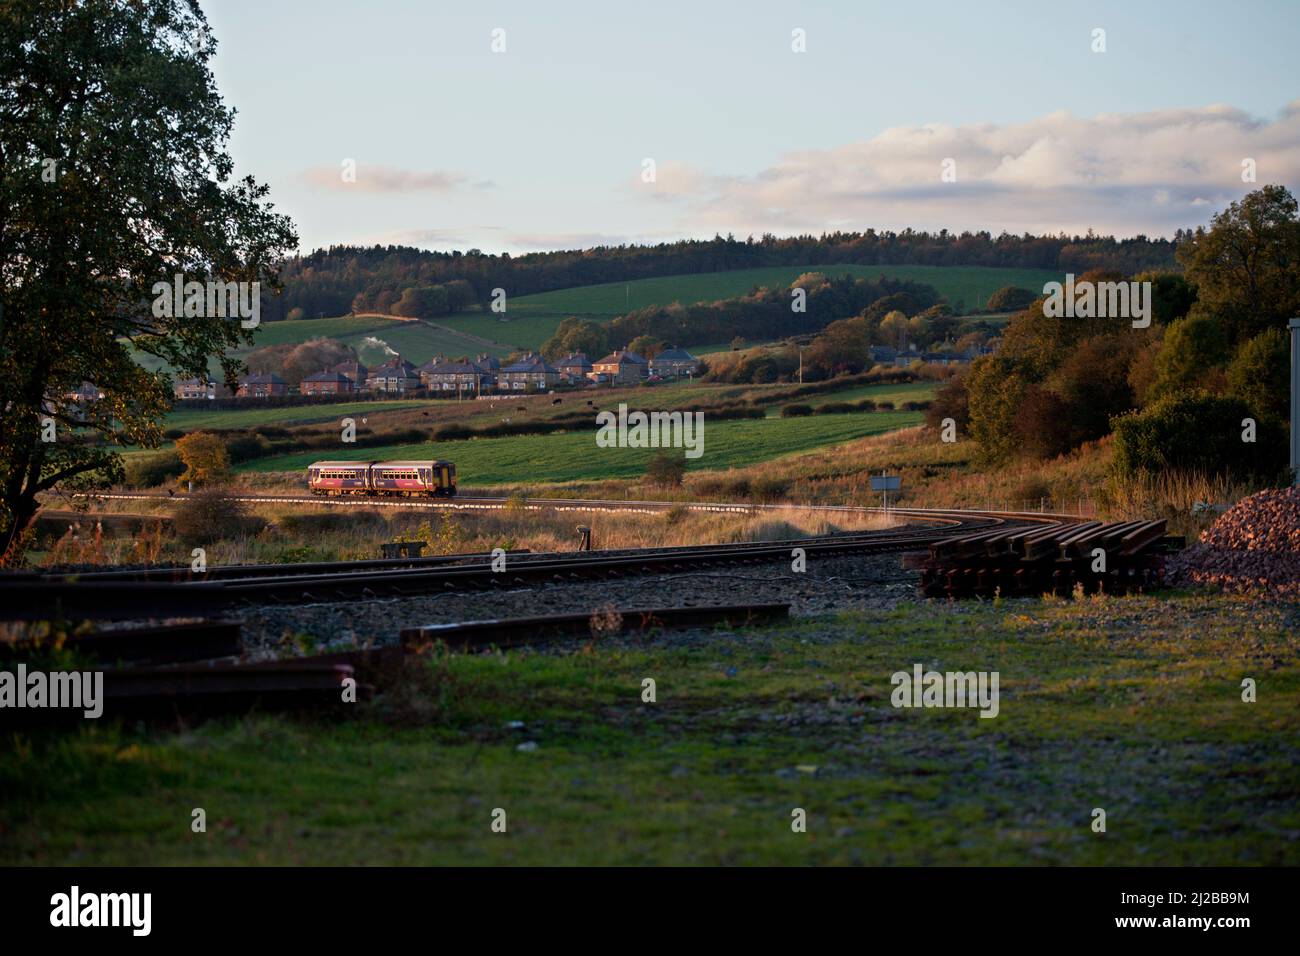 Northern Rail class 156 sprinter train passing through the countryside on the scenic Tyne valley railway line passing High Warden Stock Photo